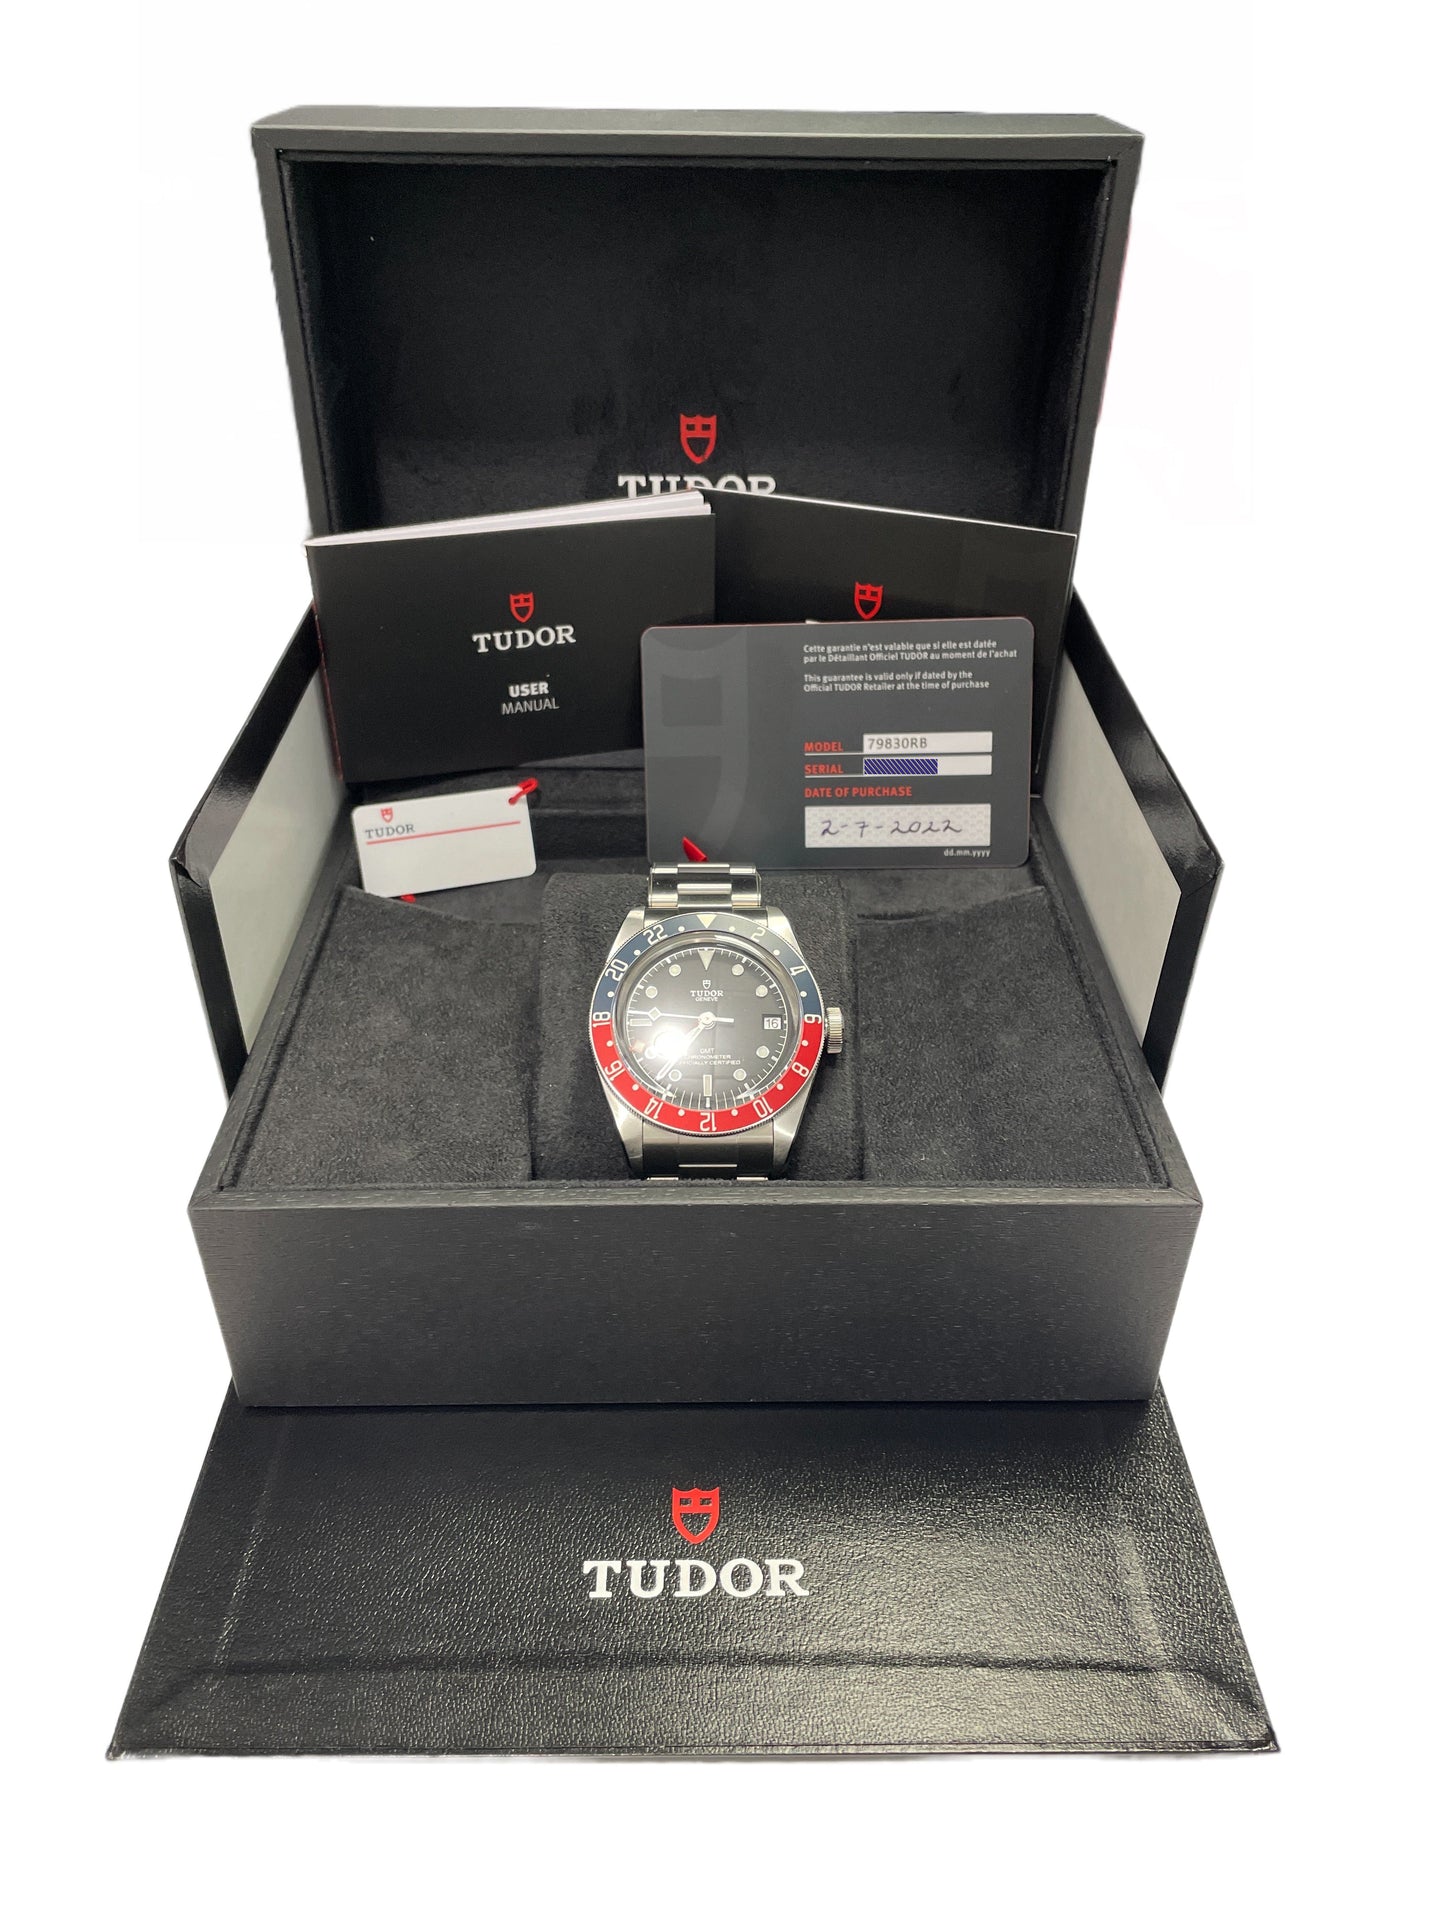 UNPOLISHED 2022 Tudor Black Bay GMT Pepsi 41mm Stainless Steel Watch 79830RB BP